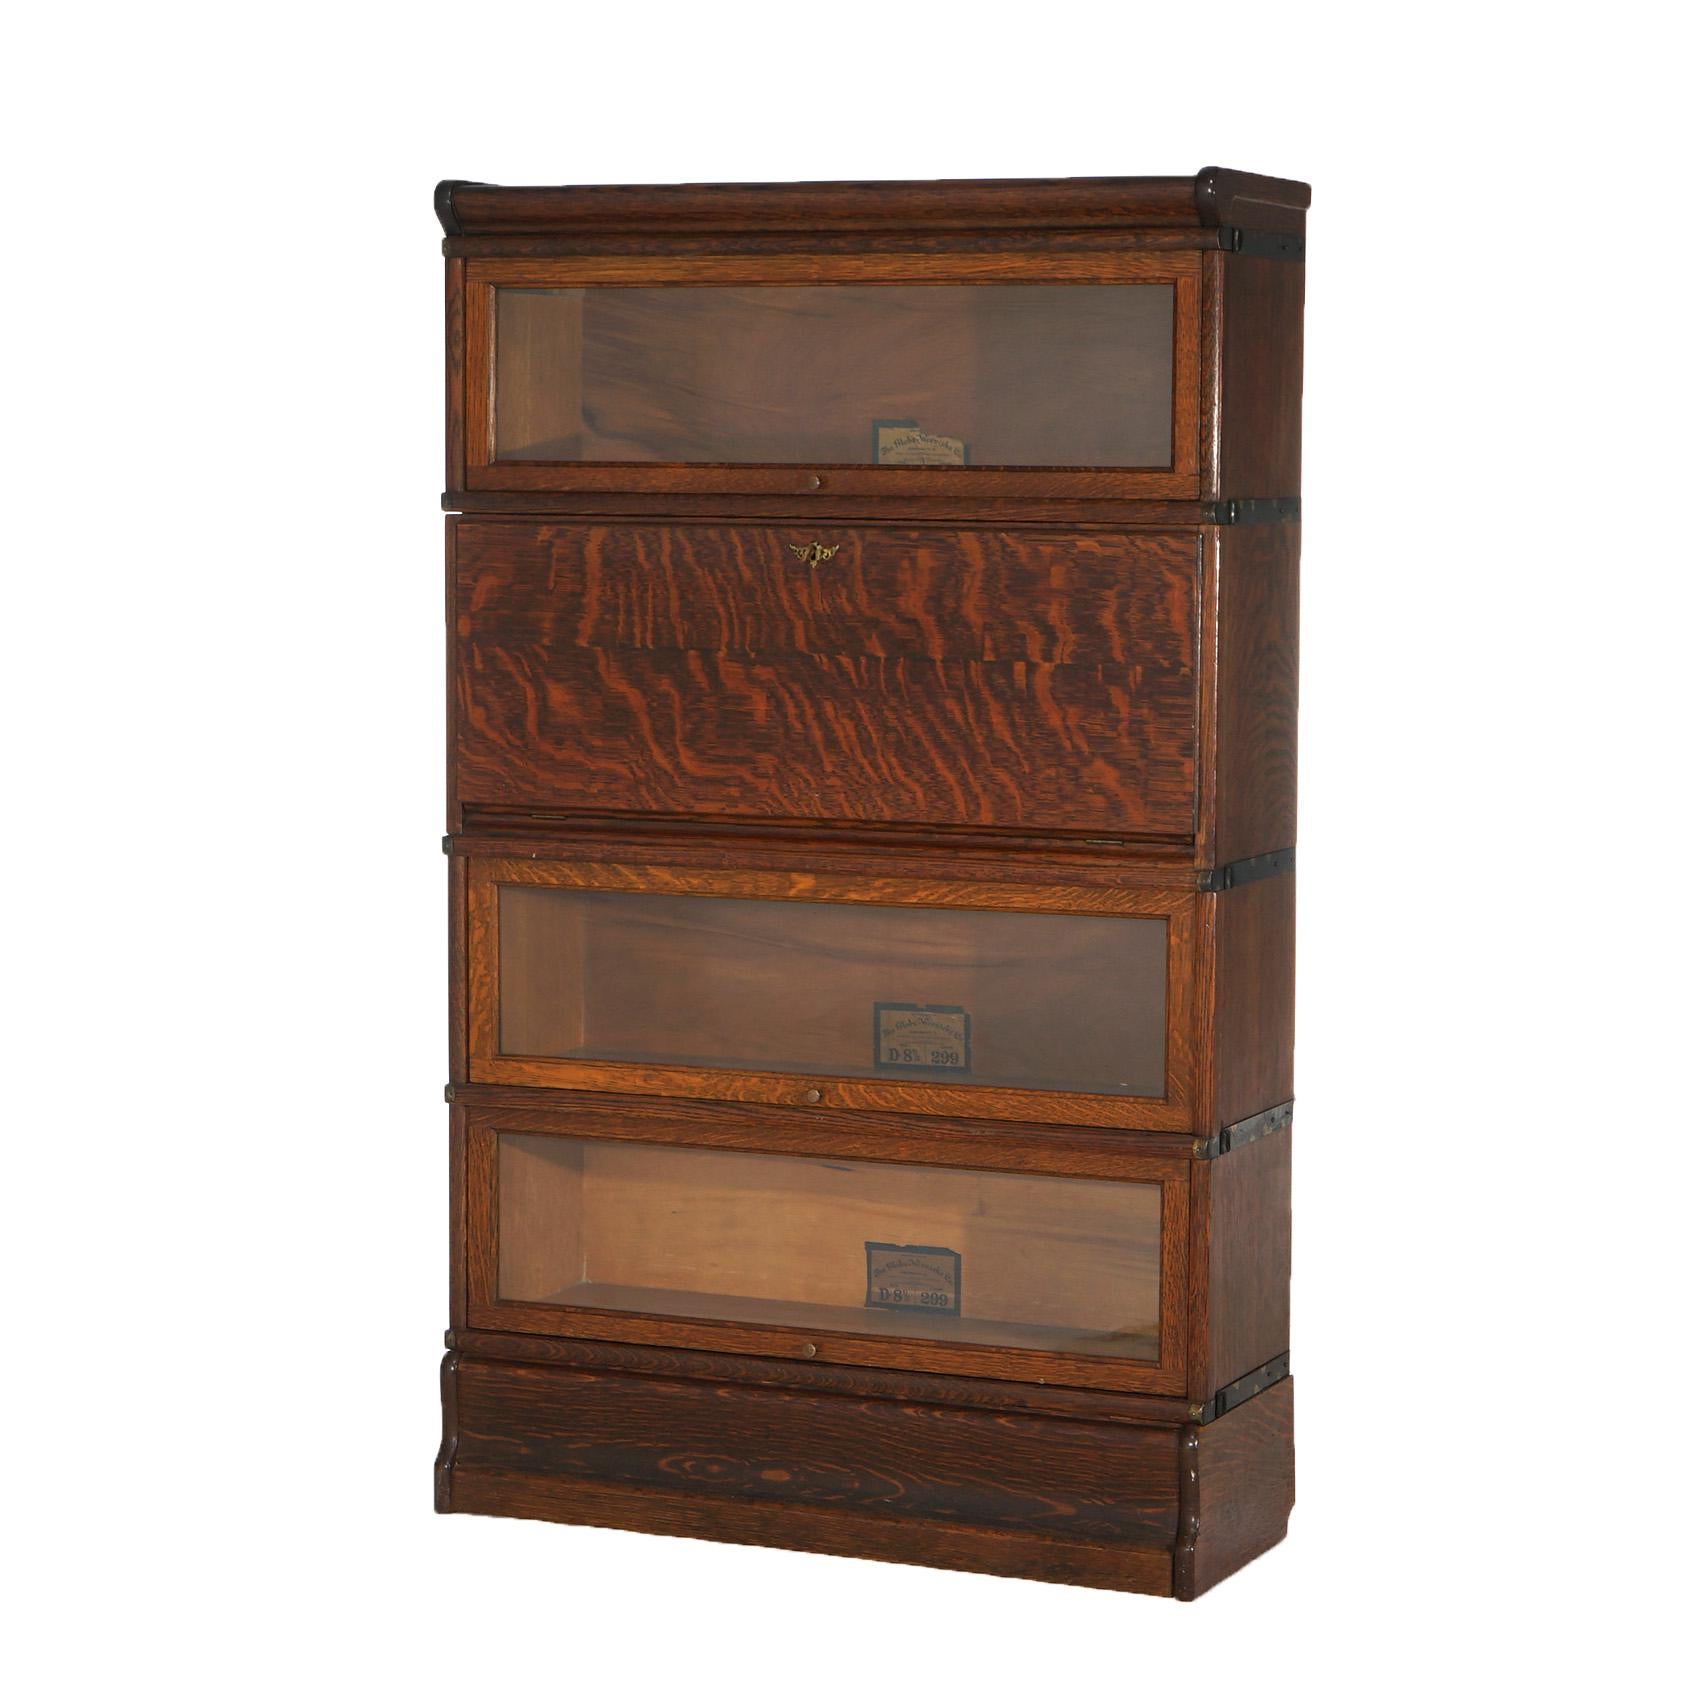 ***Ask About Reduced In-House Shipping Rates - Reliable Service & Fully Insured***
An antique Arts and Crafts Mission barrister bookcase by Globe Wernicke offers quarter sawn oak construction with three stacks having pullout glass doors, one stack